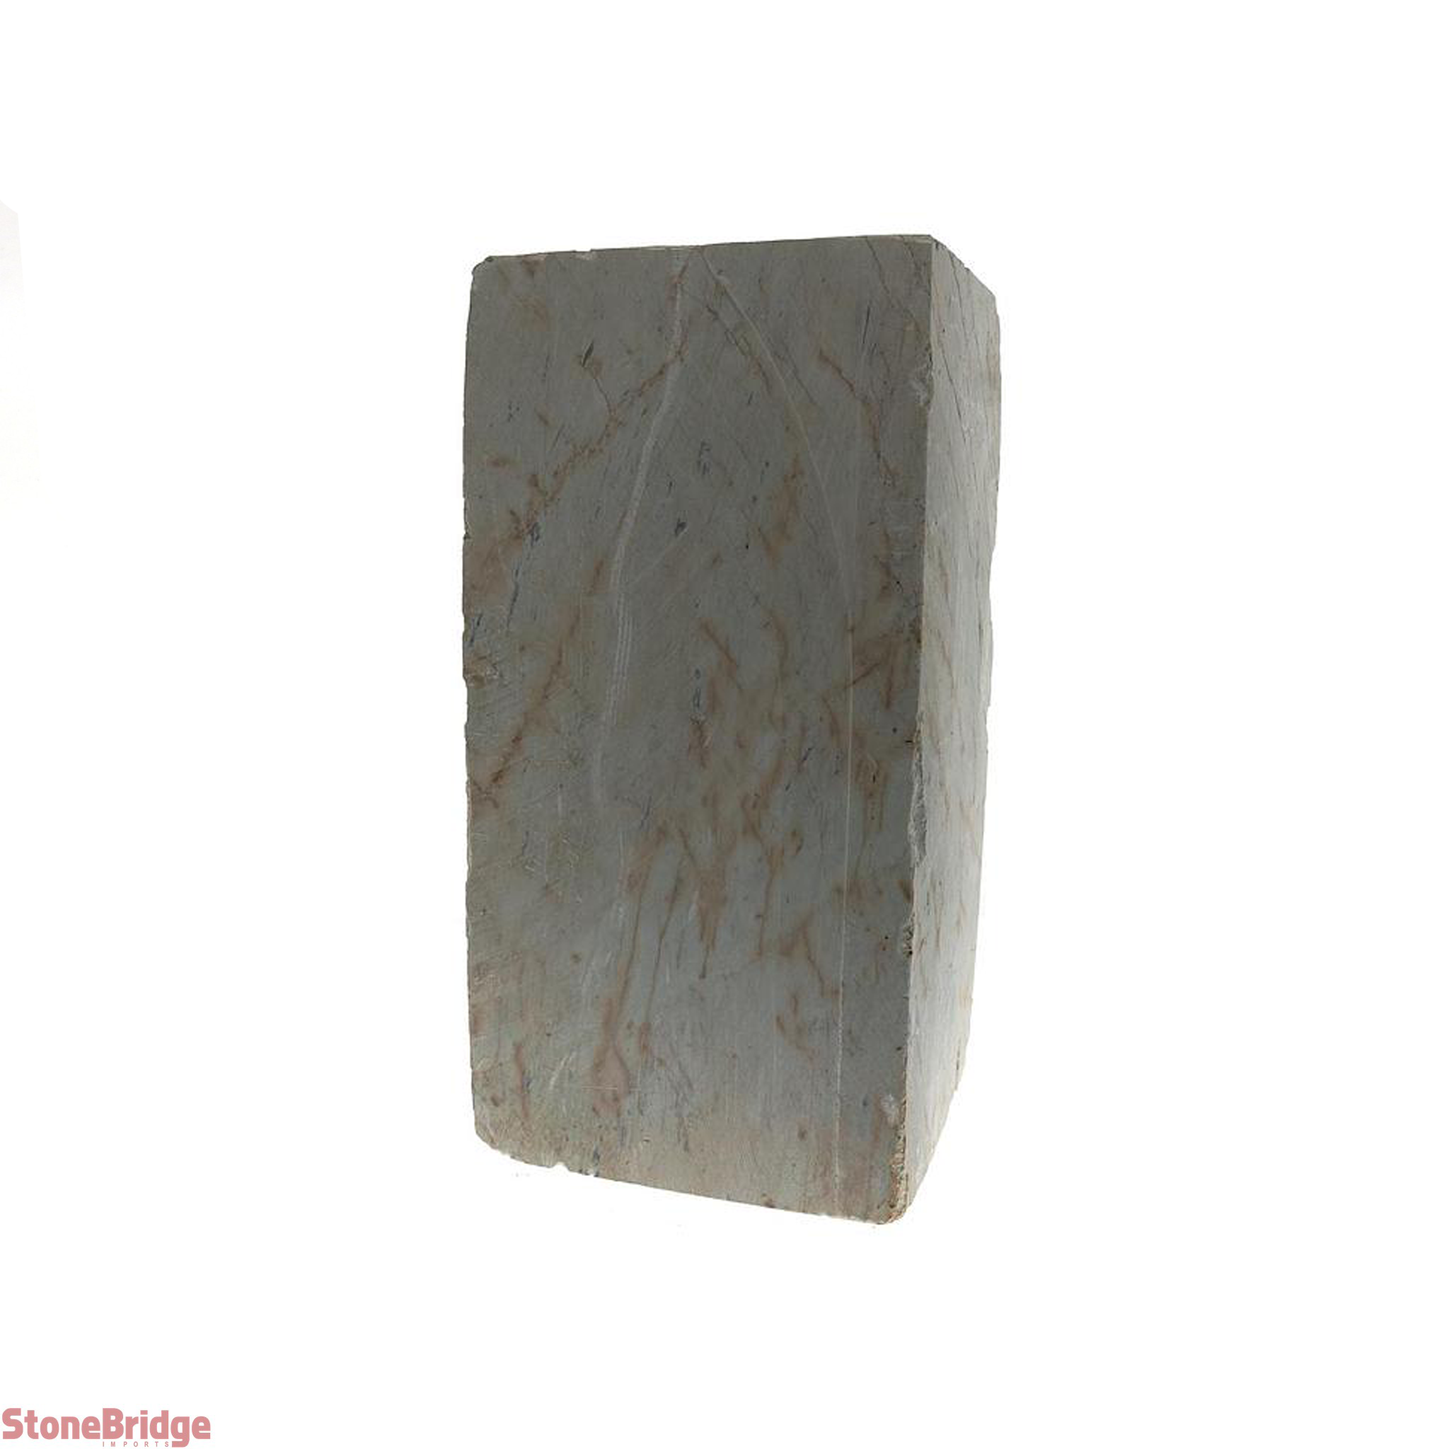 4lb Soapstone Block for Carving